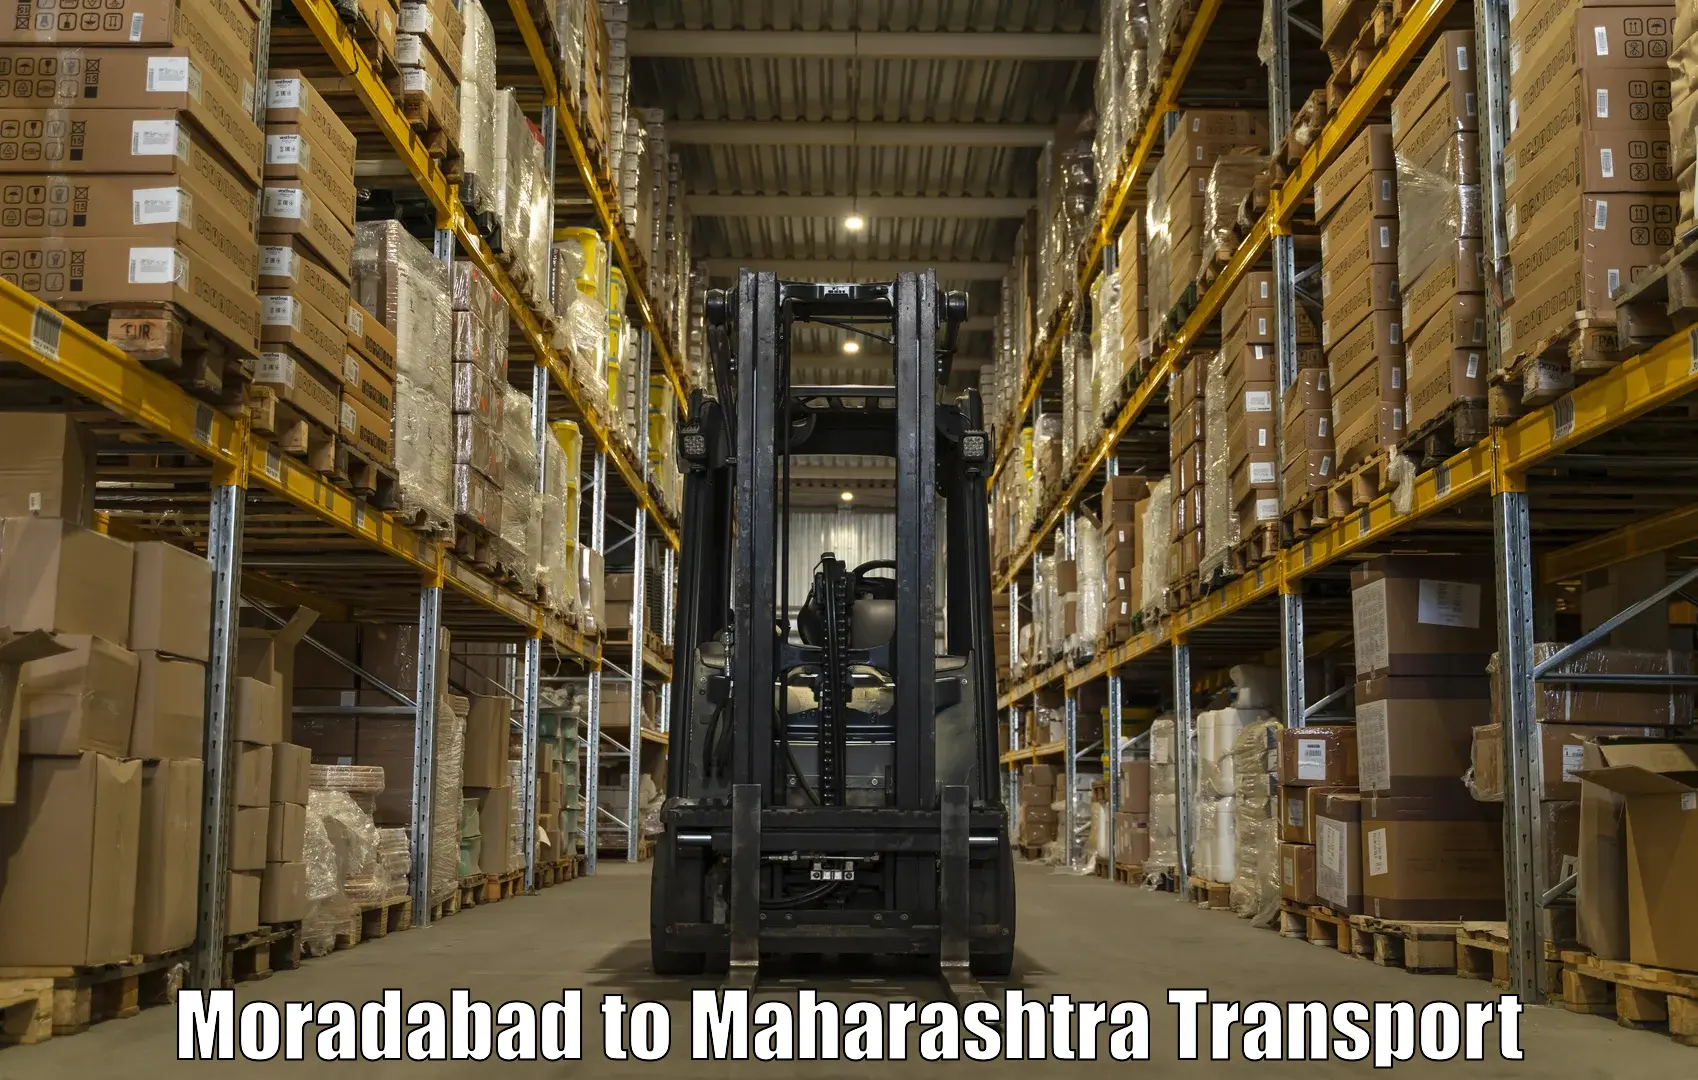 Truck transport companies in India Moradabad to Mantha